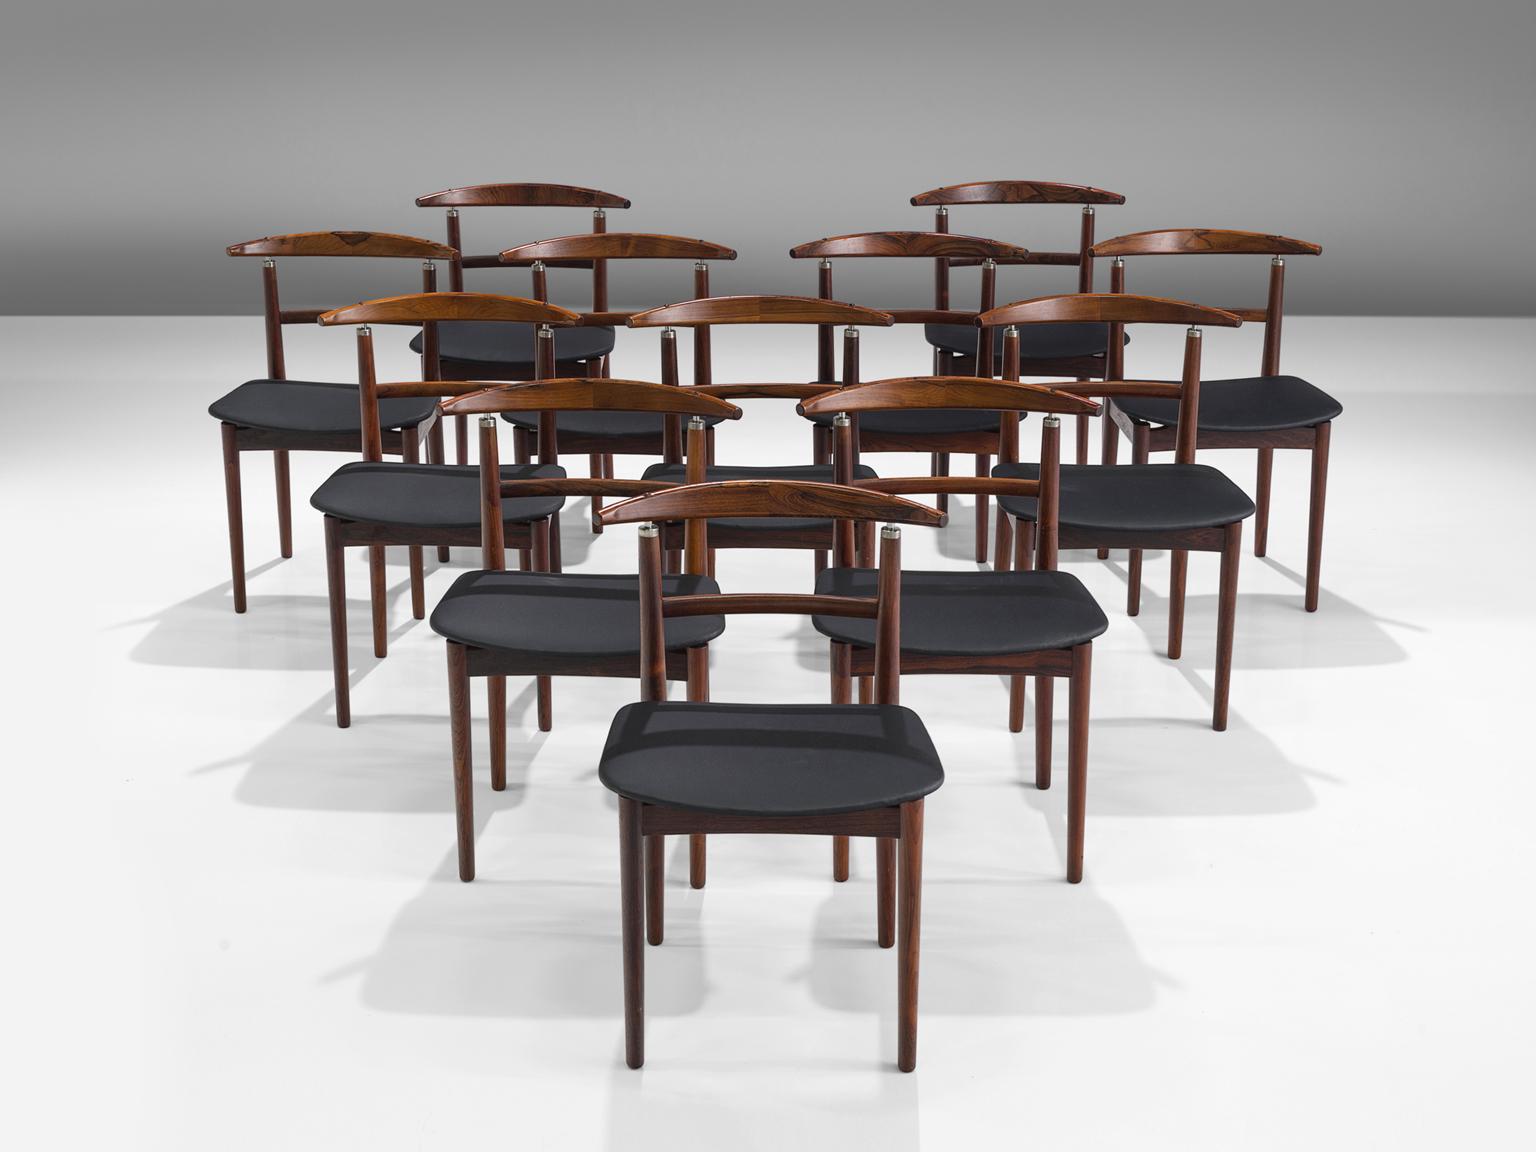 Helge Sibast & Børge Rammeskov for Sibast møbelfabrik, set of 12 dining chairs model 465, rosewood and black faux leather, Denmark, 1962.

This set is designed by Helge Sibast and Børge Rammeskov for Sibast møbelfabrik. This model, 465, holds a